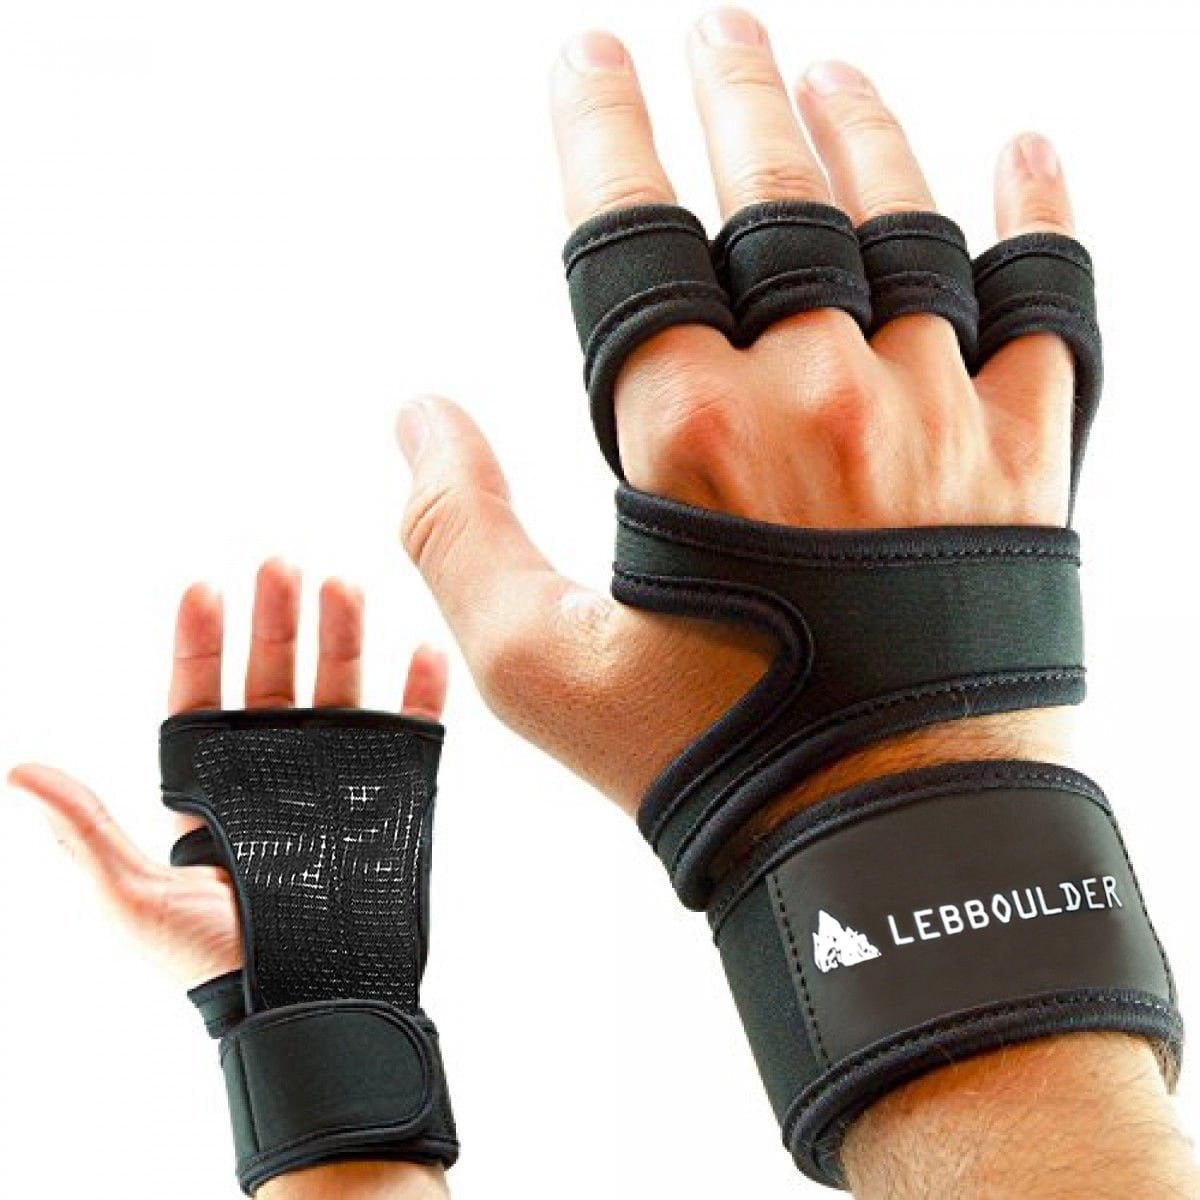 WEIGHT LIFTING GLOVES GYM LEATHER TRAINING CROSSFIT EXERCISE BODYBUILDING GLOVES